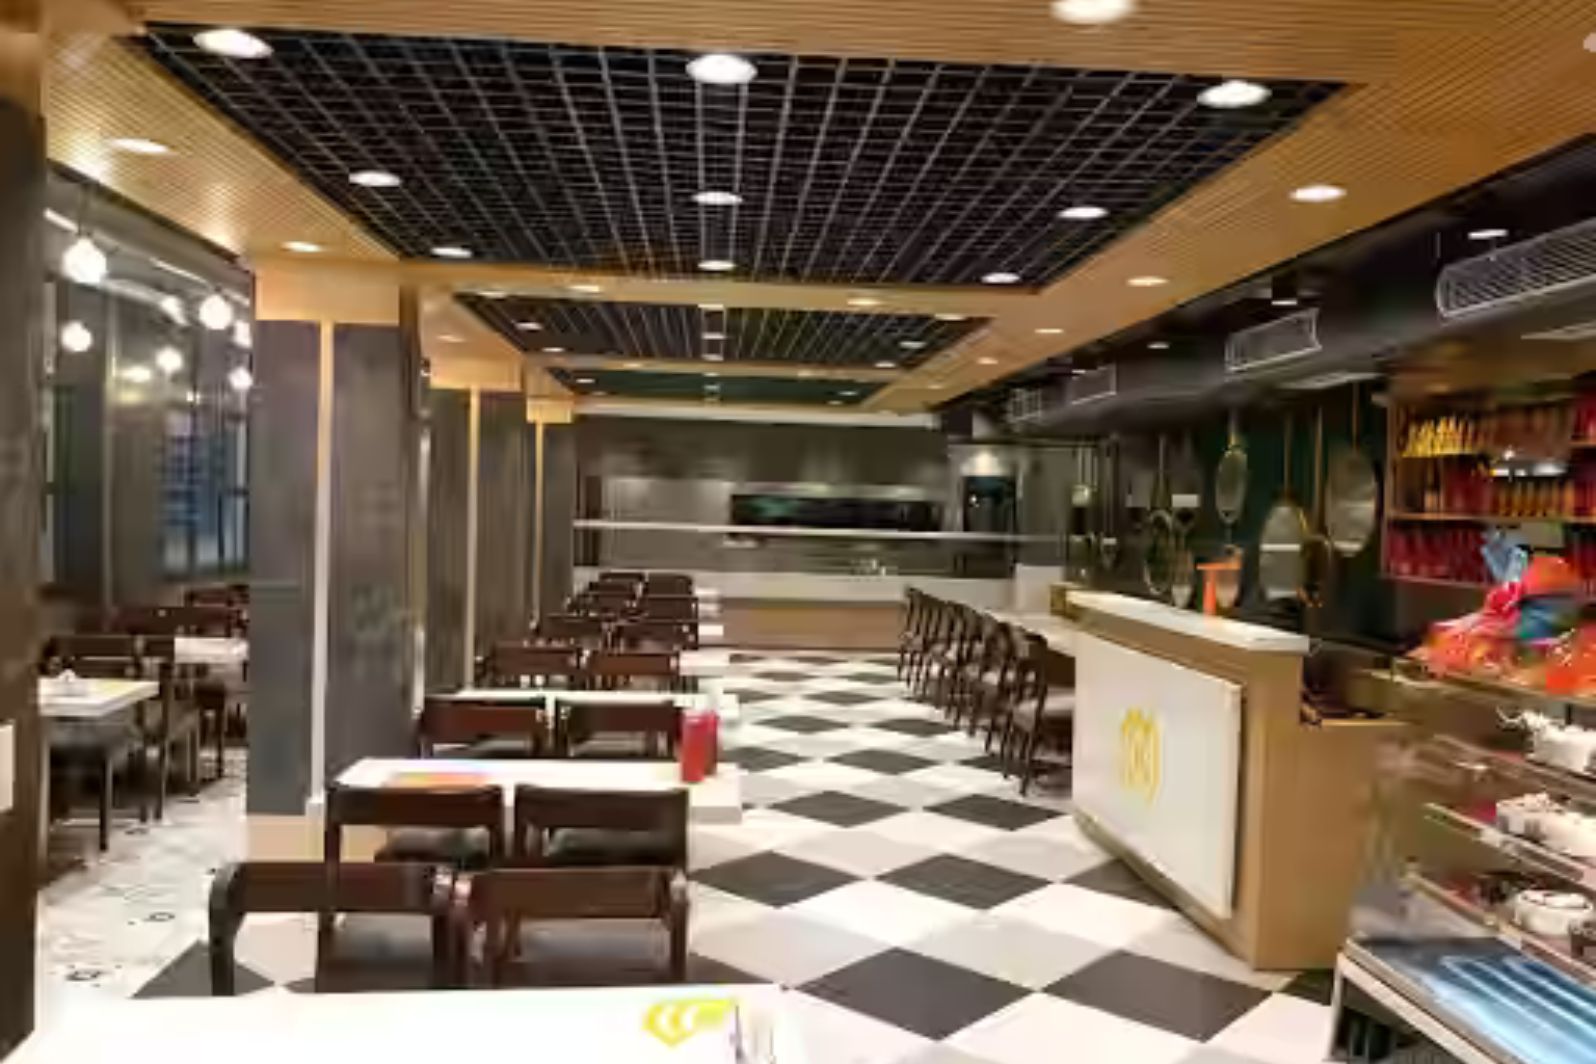 mithaas sweets restaurant sector 53, noida